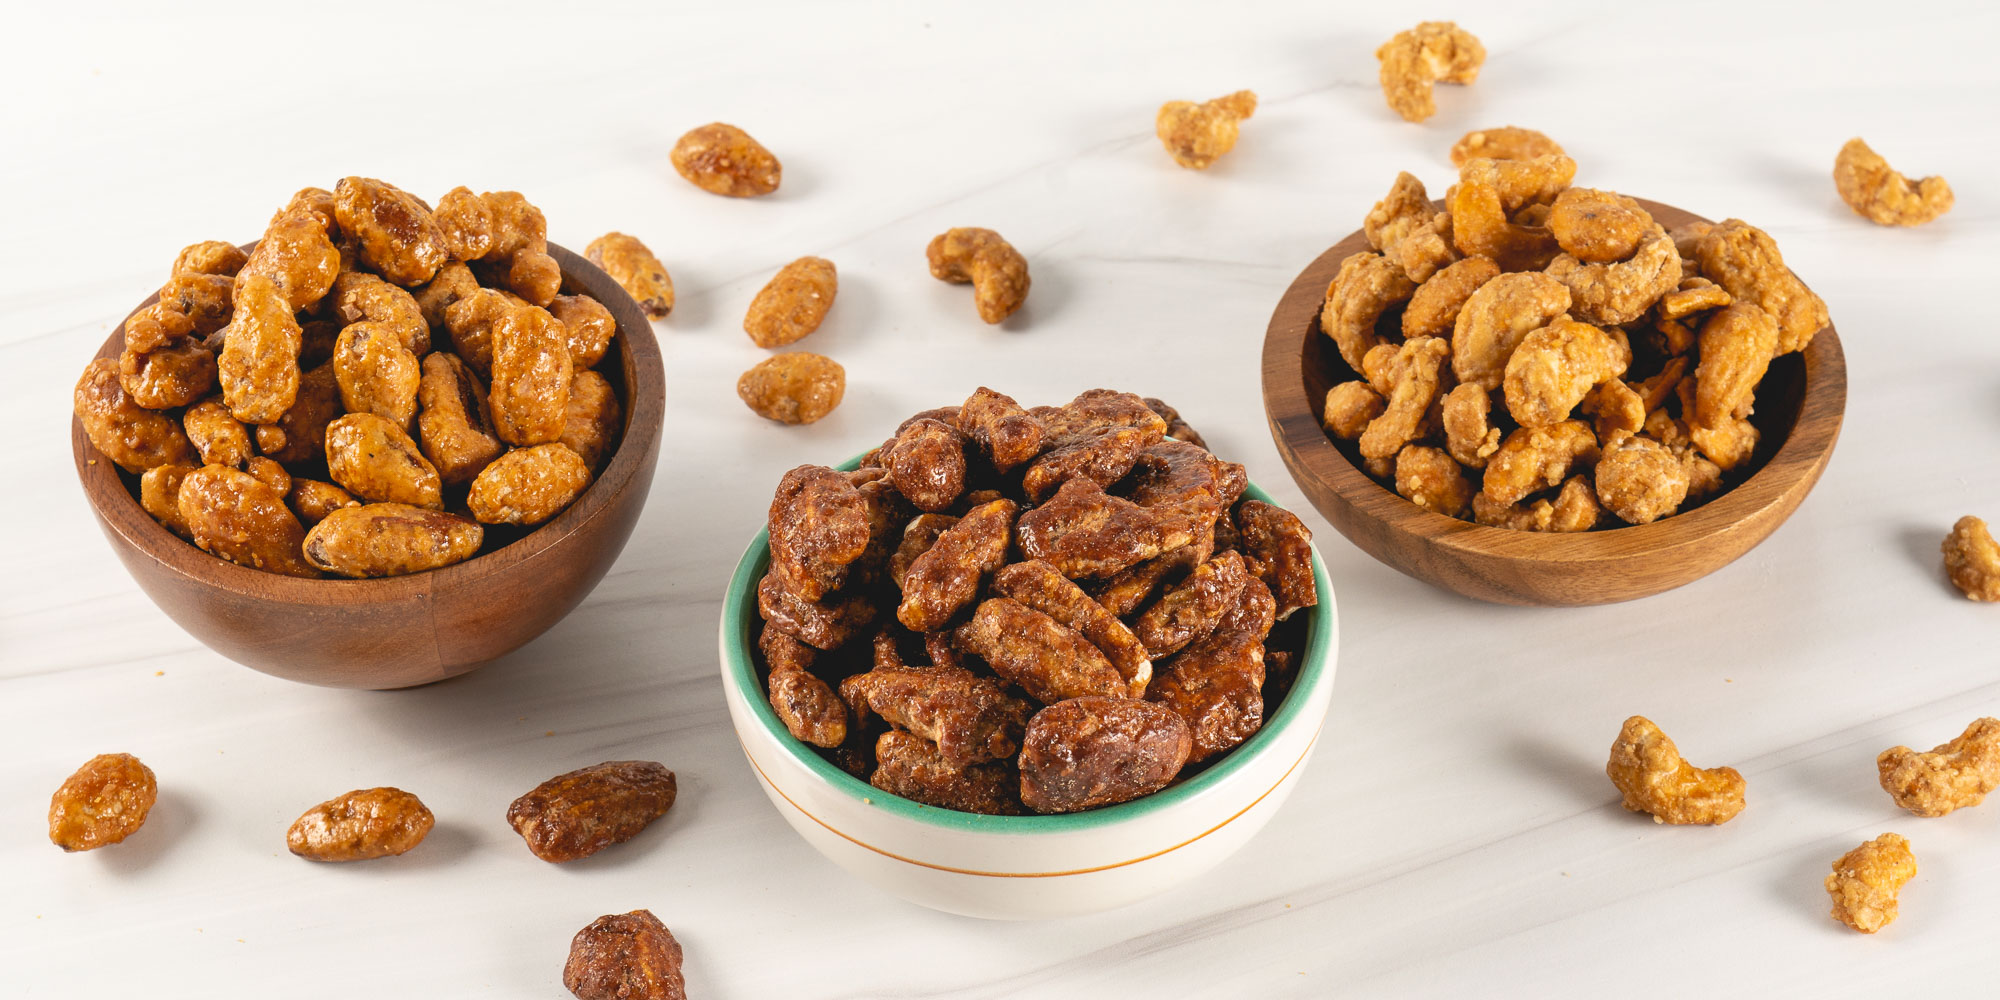 Candied nuts wholesale snacking companies